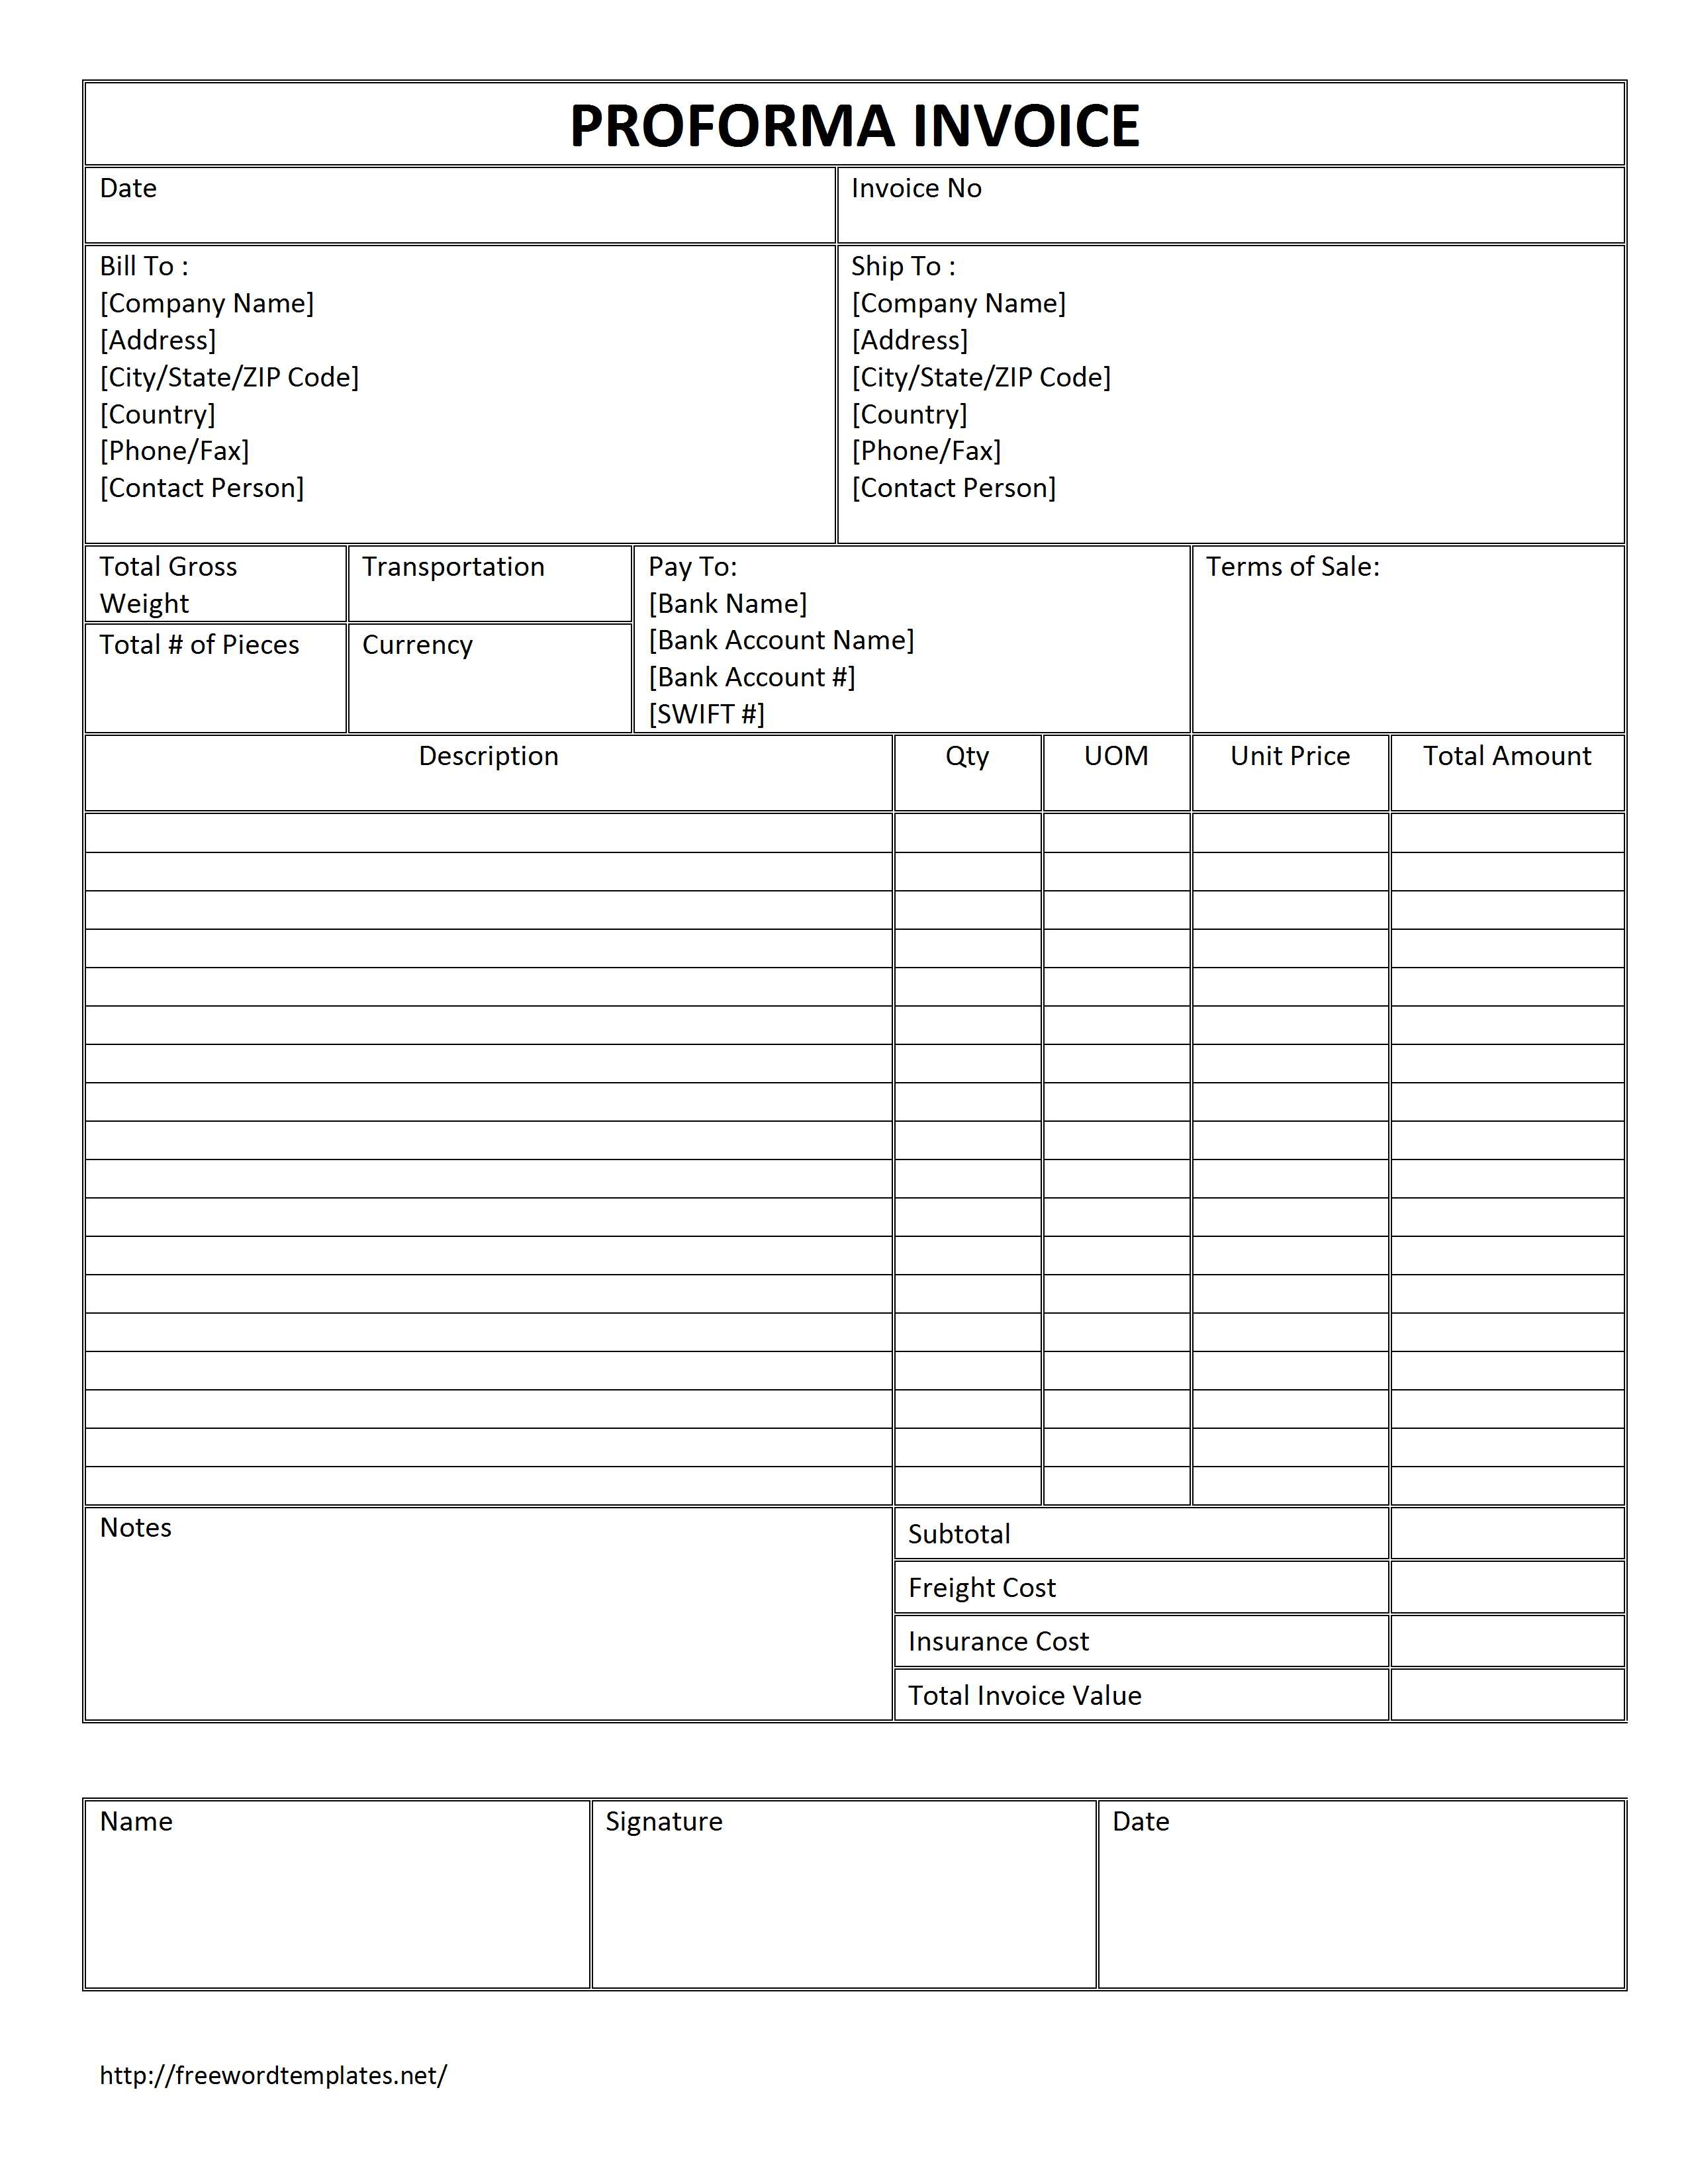 proforma-invoice-format-for-export-invoice-template-ideas